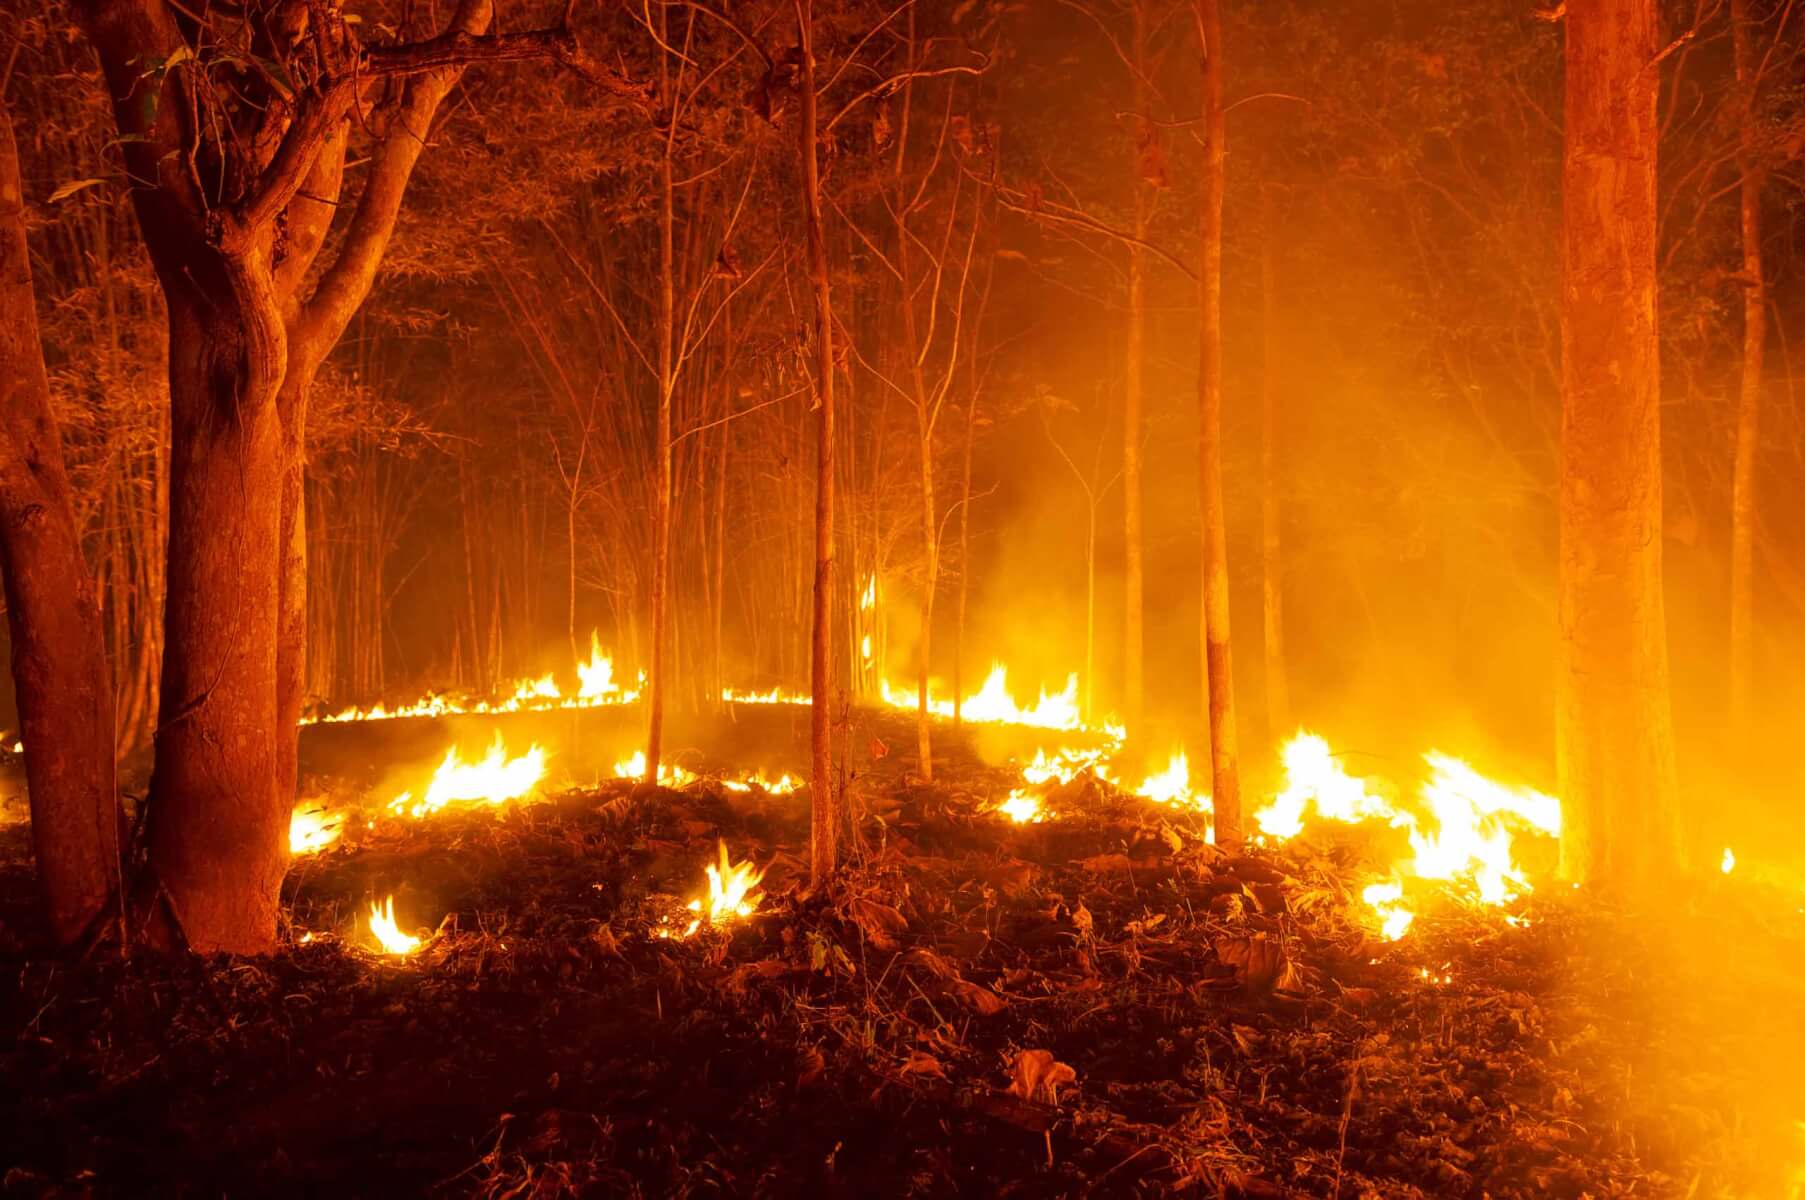 Forest fire, Wildfire burning tree in red and orange color at night in the forest at night, North Thailand.